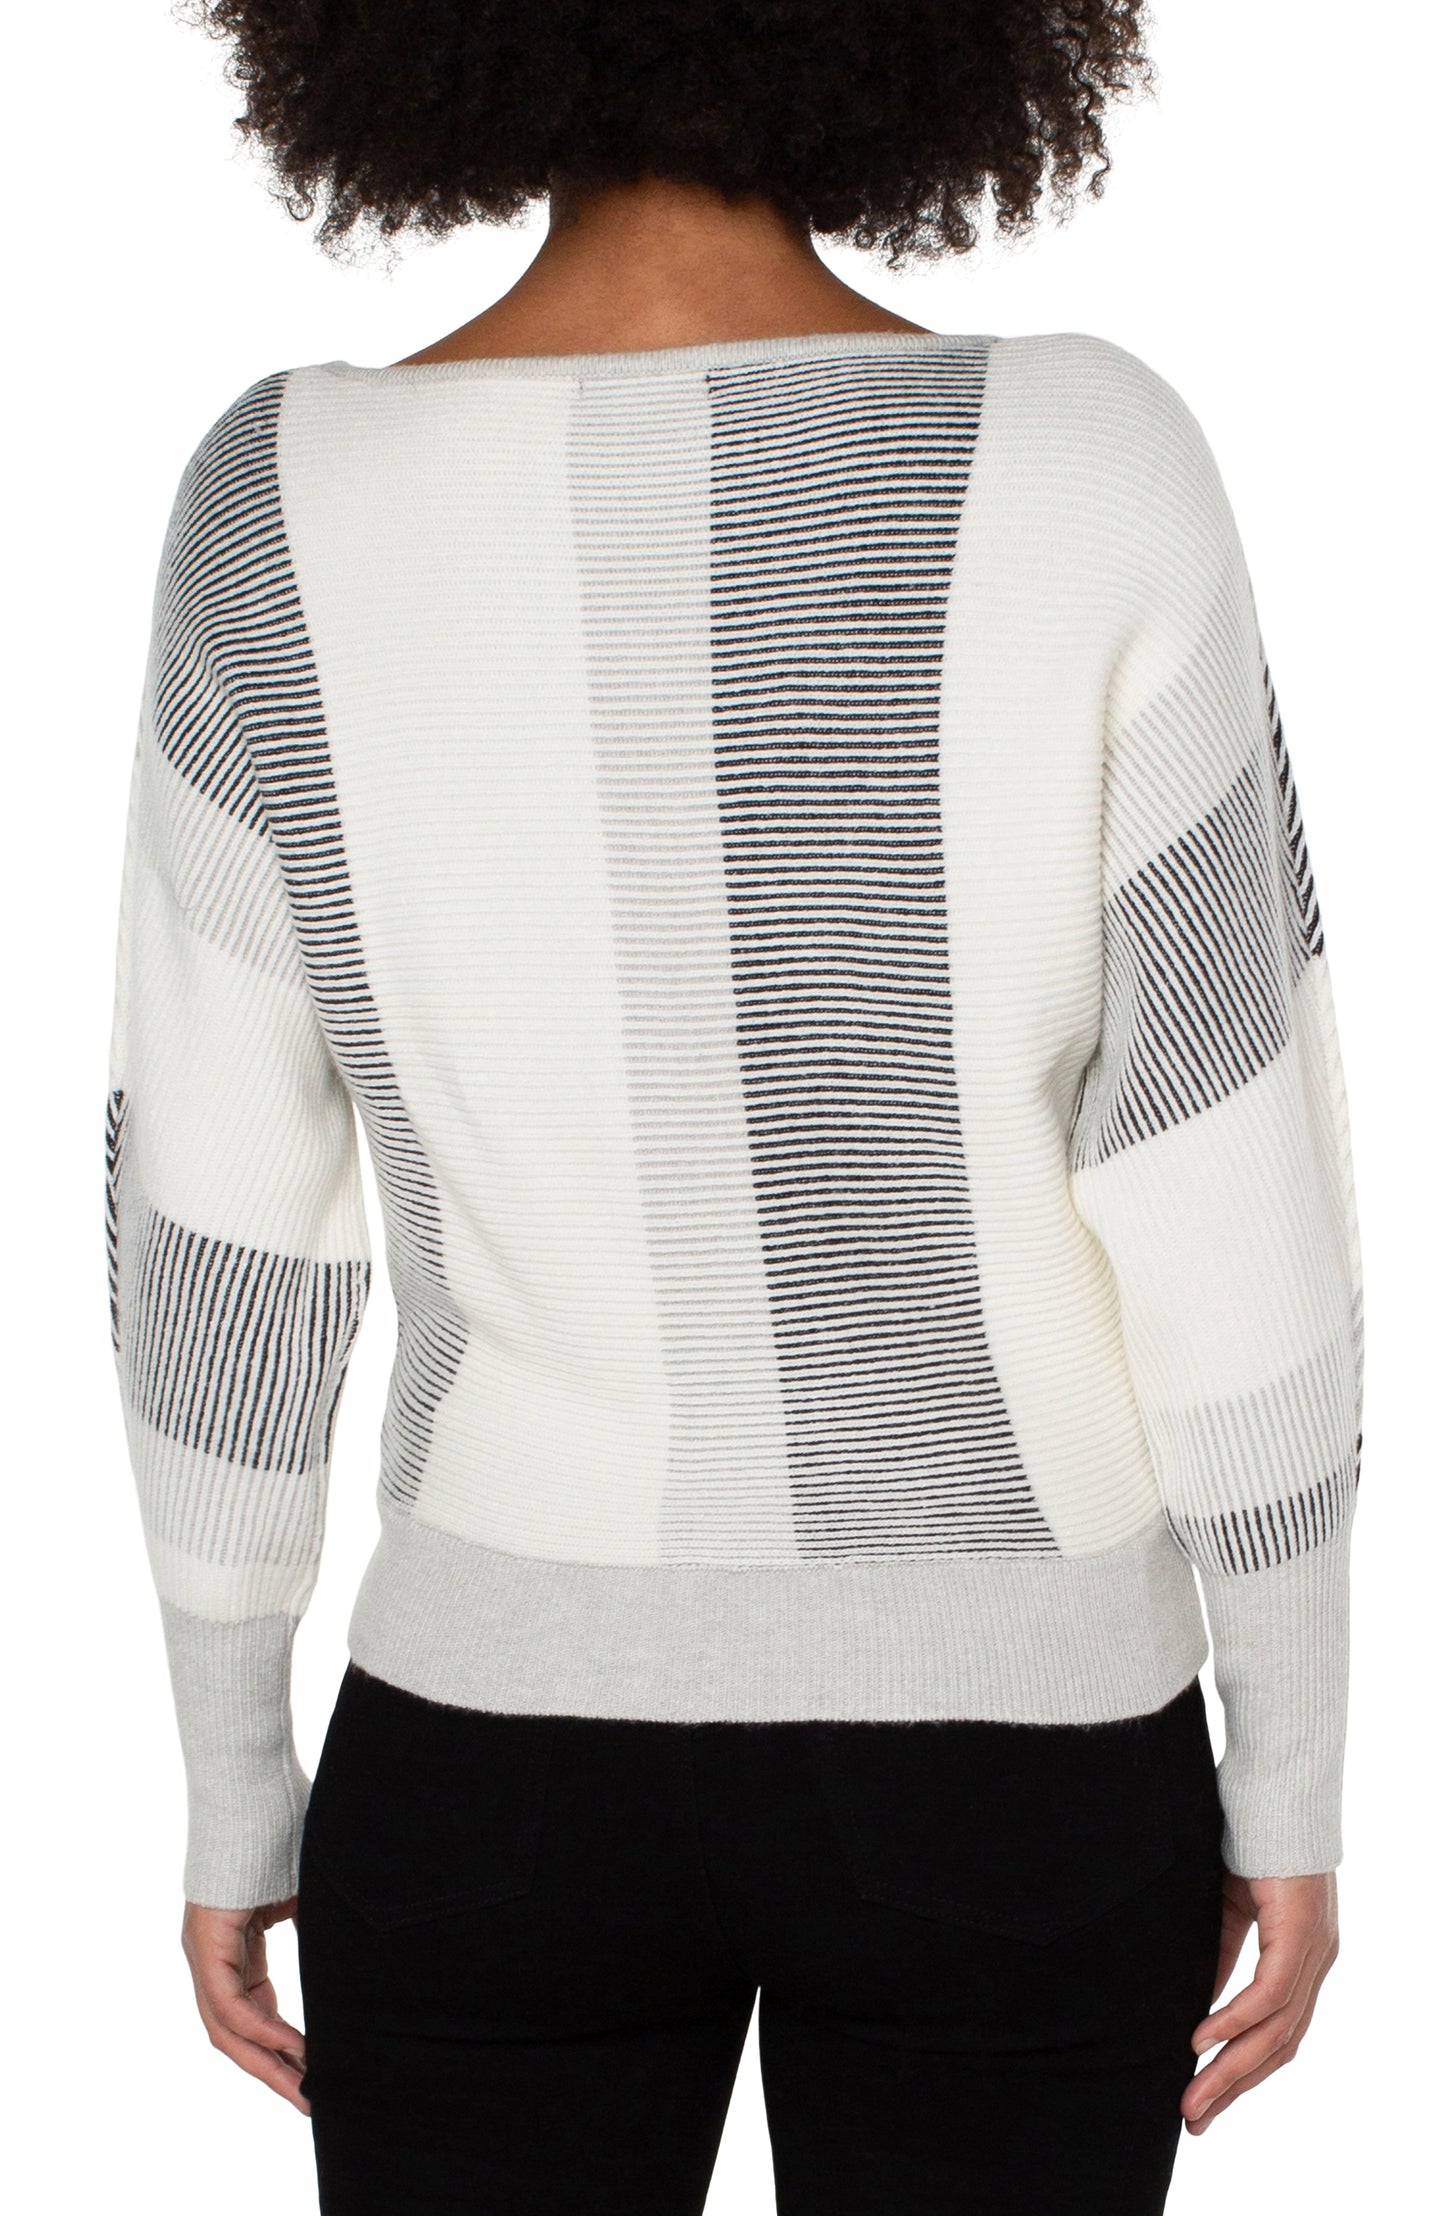 LIVERPOOL BOAT NECK DOLMAN SLEEVE SWEATER WITH COLORBLOCK DETAIL